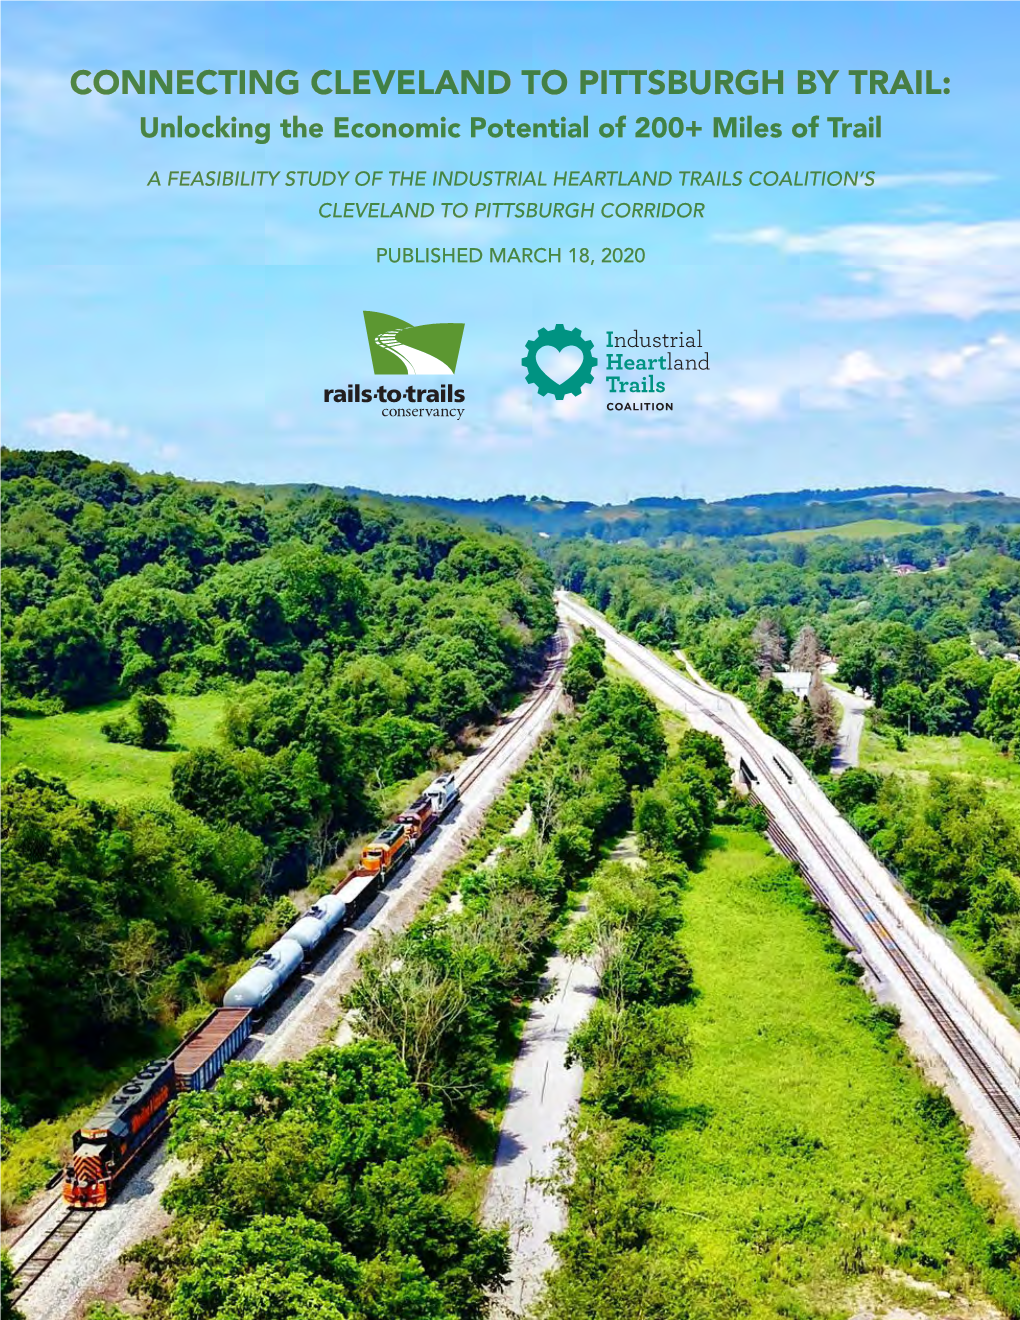 CONNECTING CLEVELAND to PITTSBURGH by TRAIL: Unlocking the Economic Potential of 200+ Miles of Trail